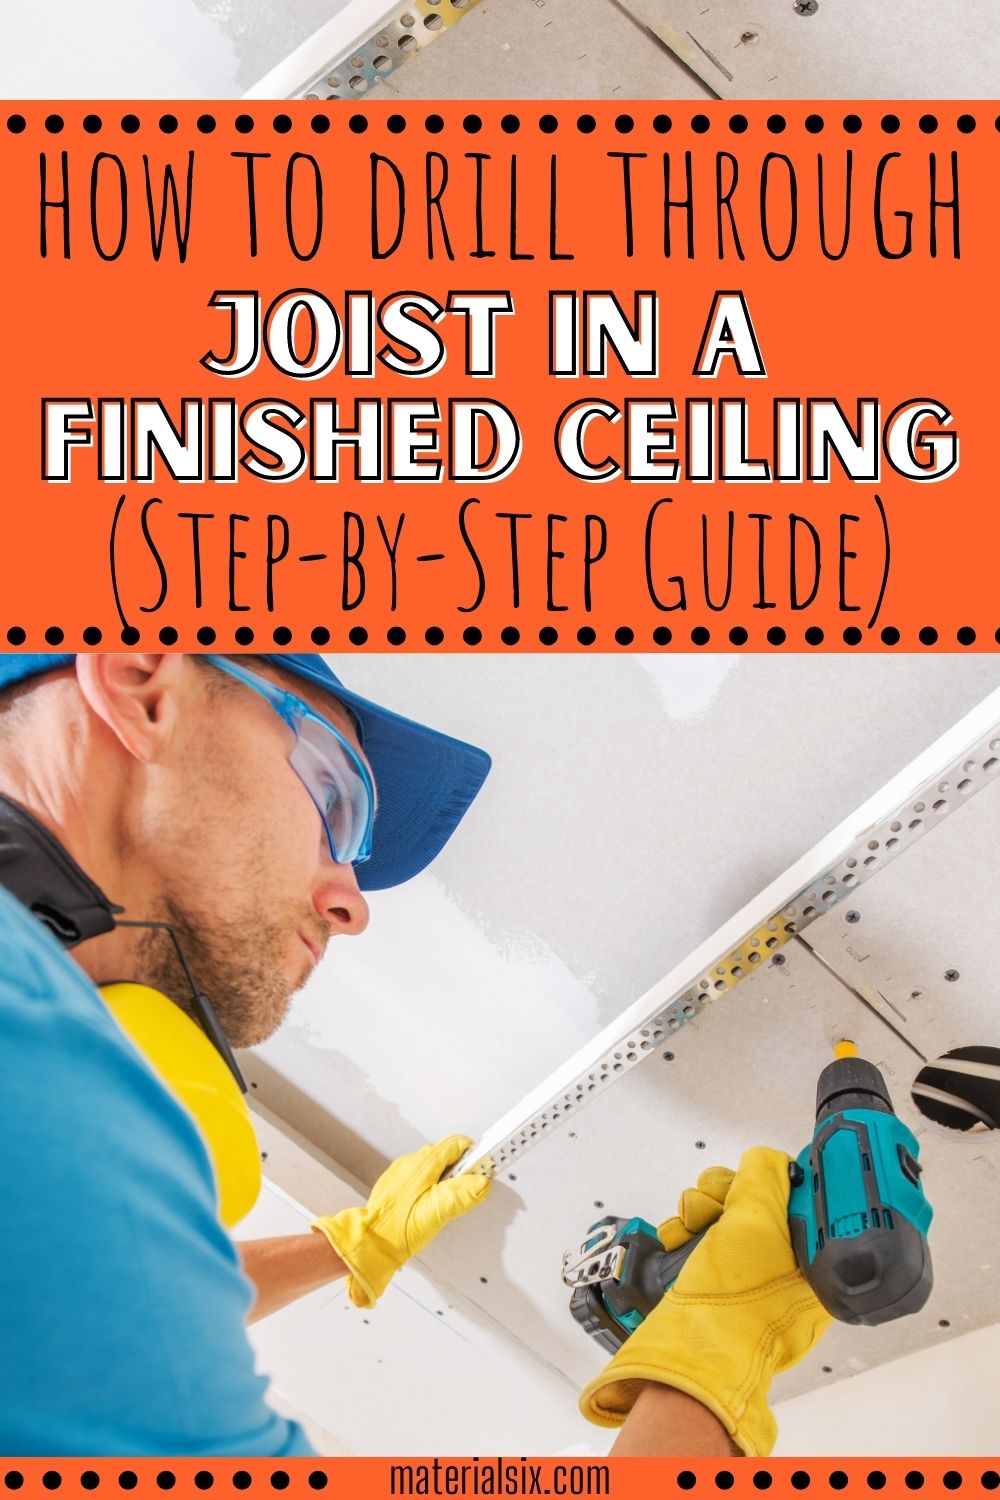 How to Drill Through Joists In A Finished Ceiling